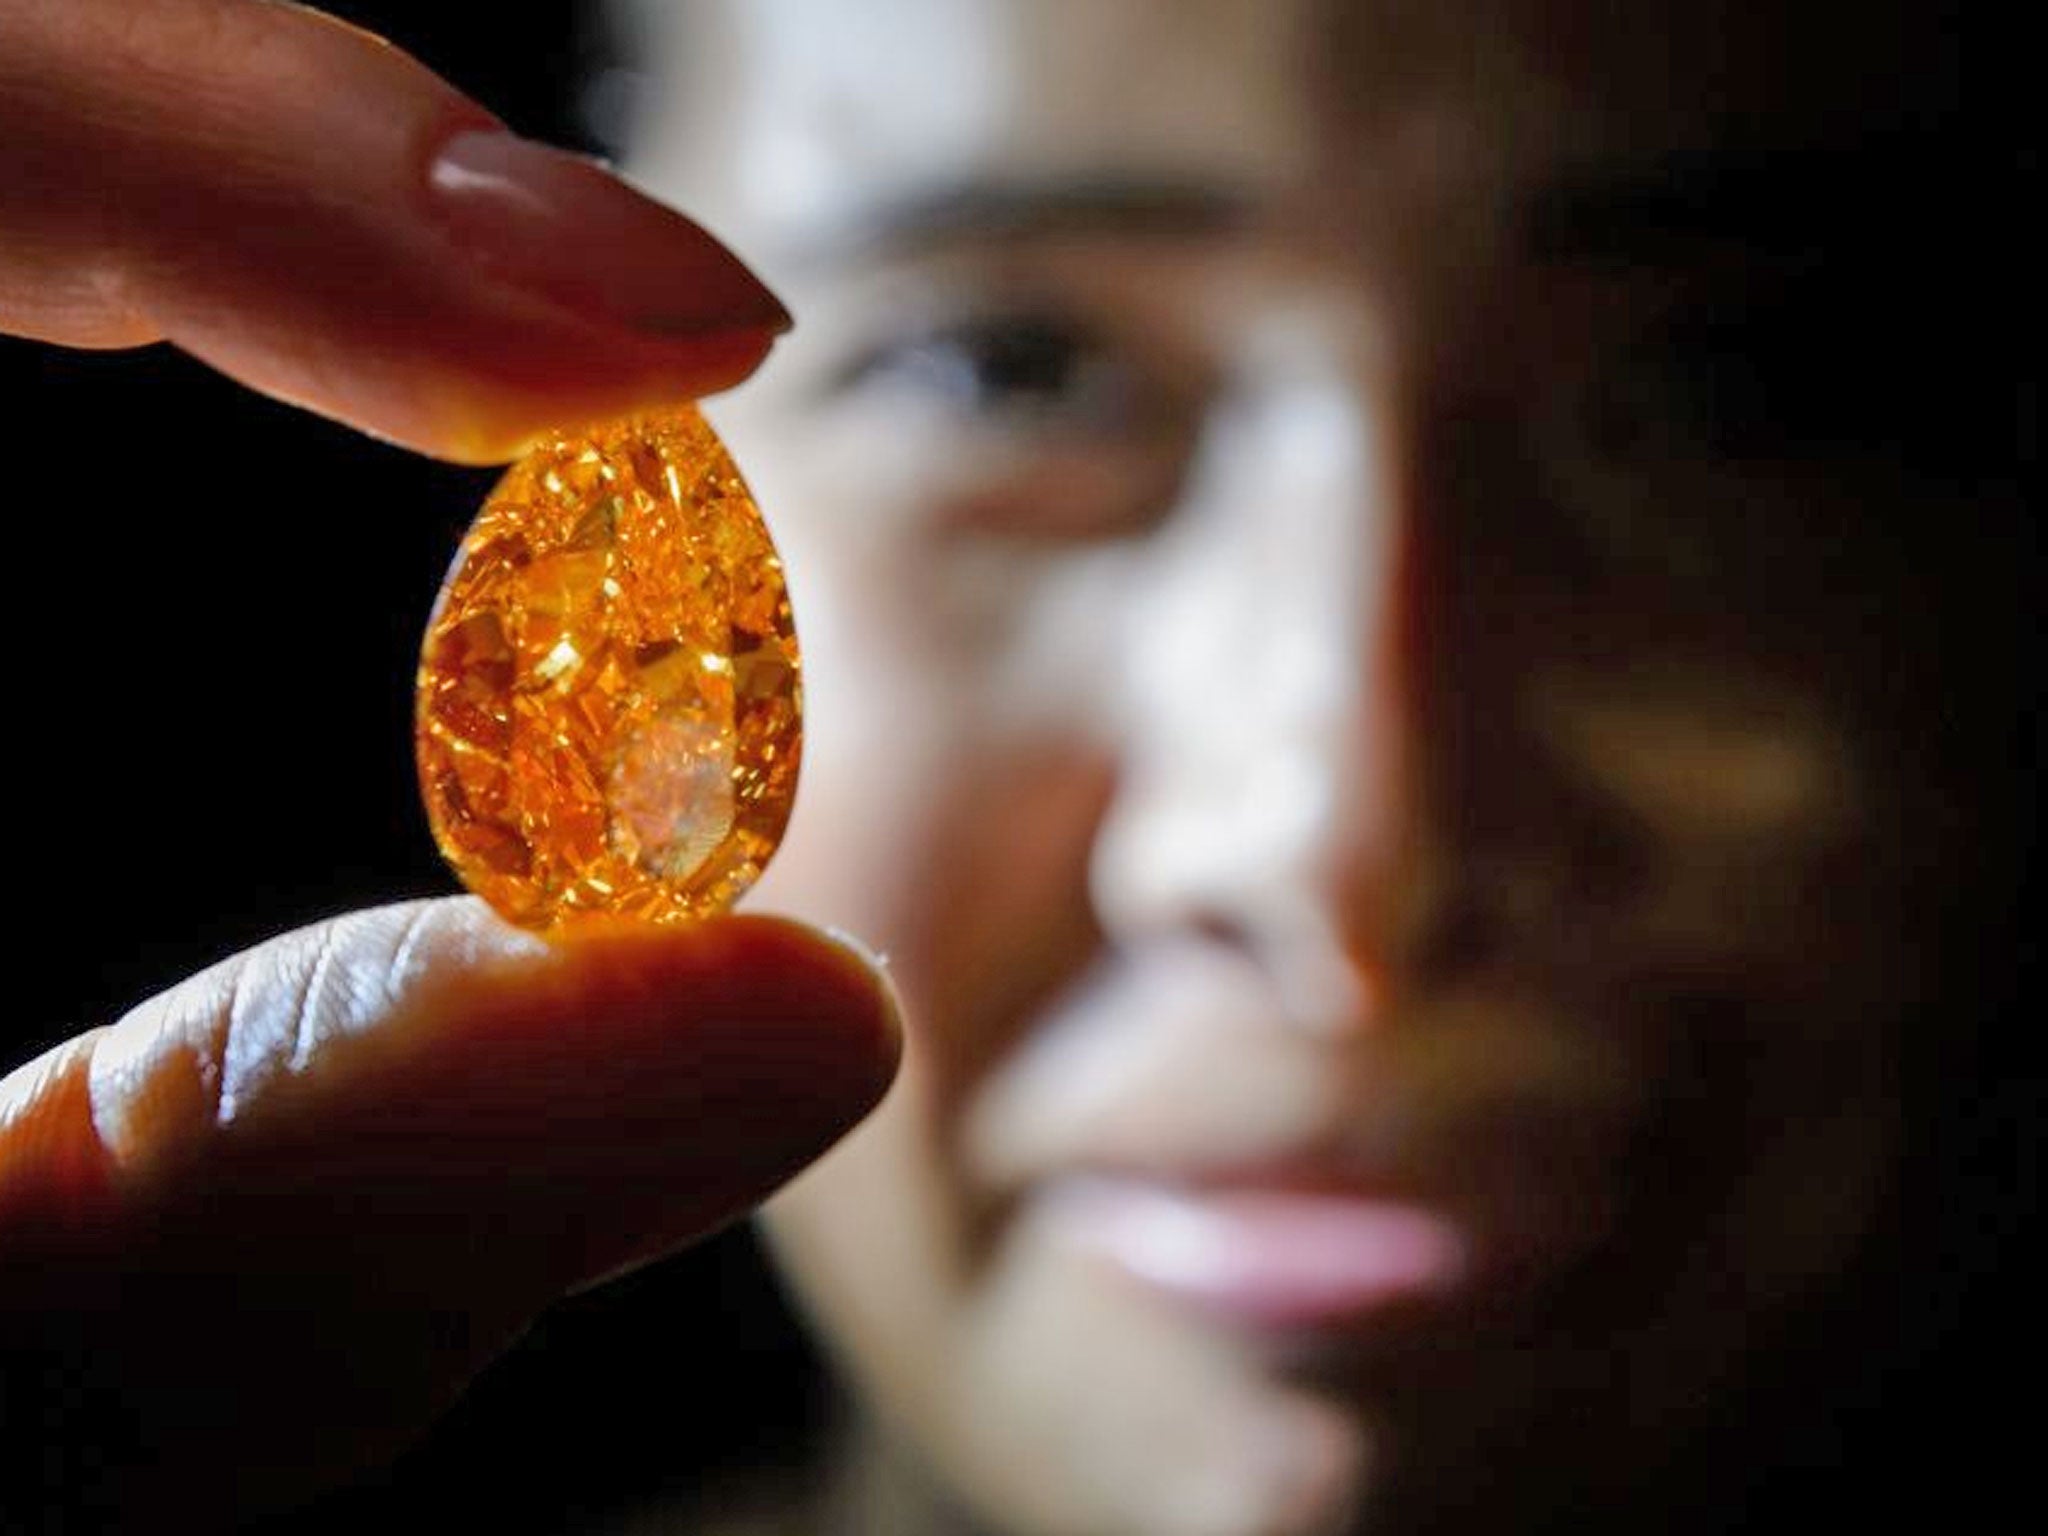 A rare, orange,14.82 carat diamond called The Orange has sold for nearly 36 million dollars at an auction in Geneva